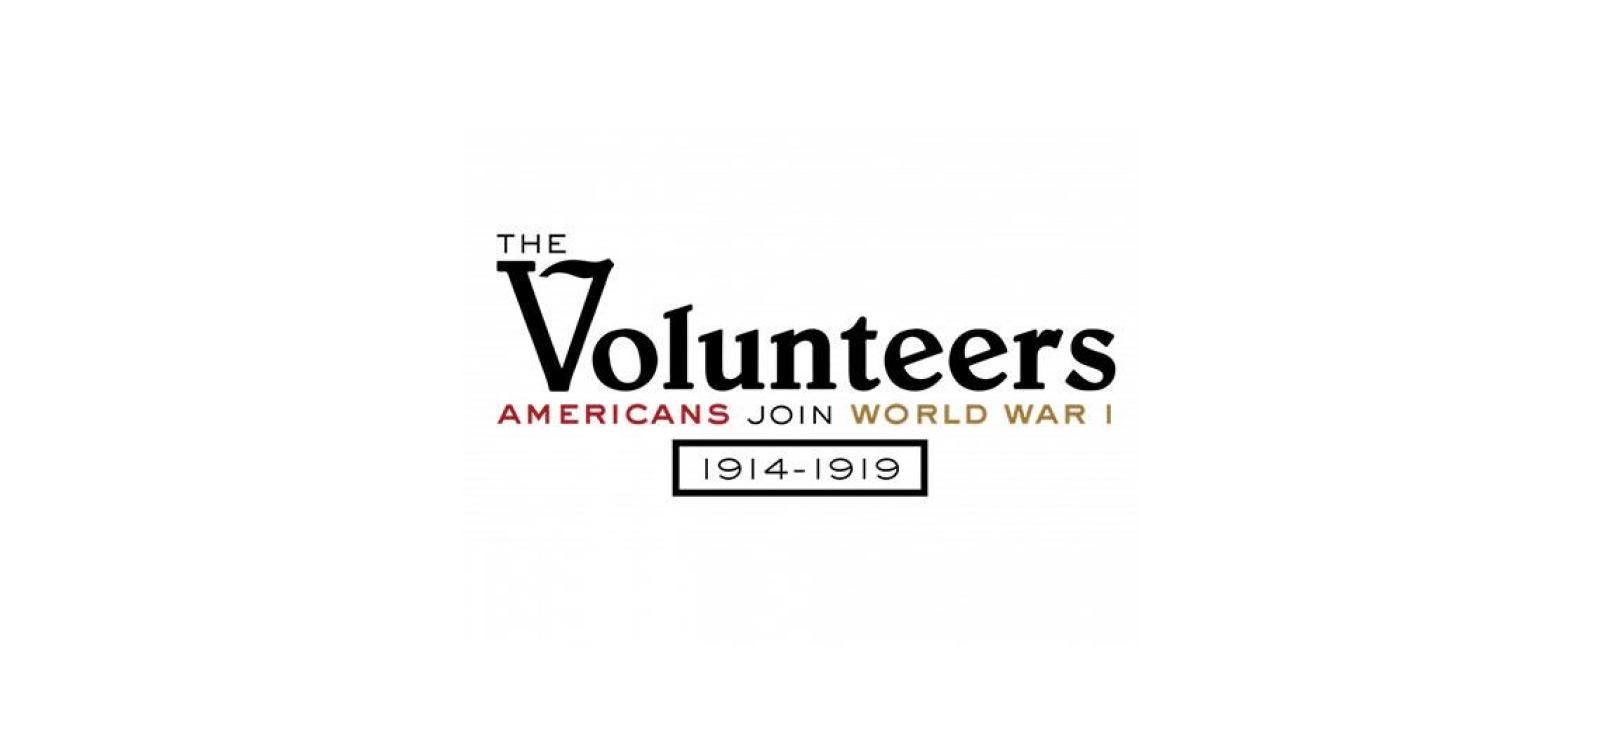 Text on white background: The Volunteers / Americans Join World War I / 1914-1919